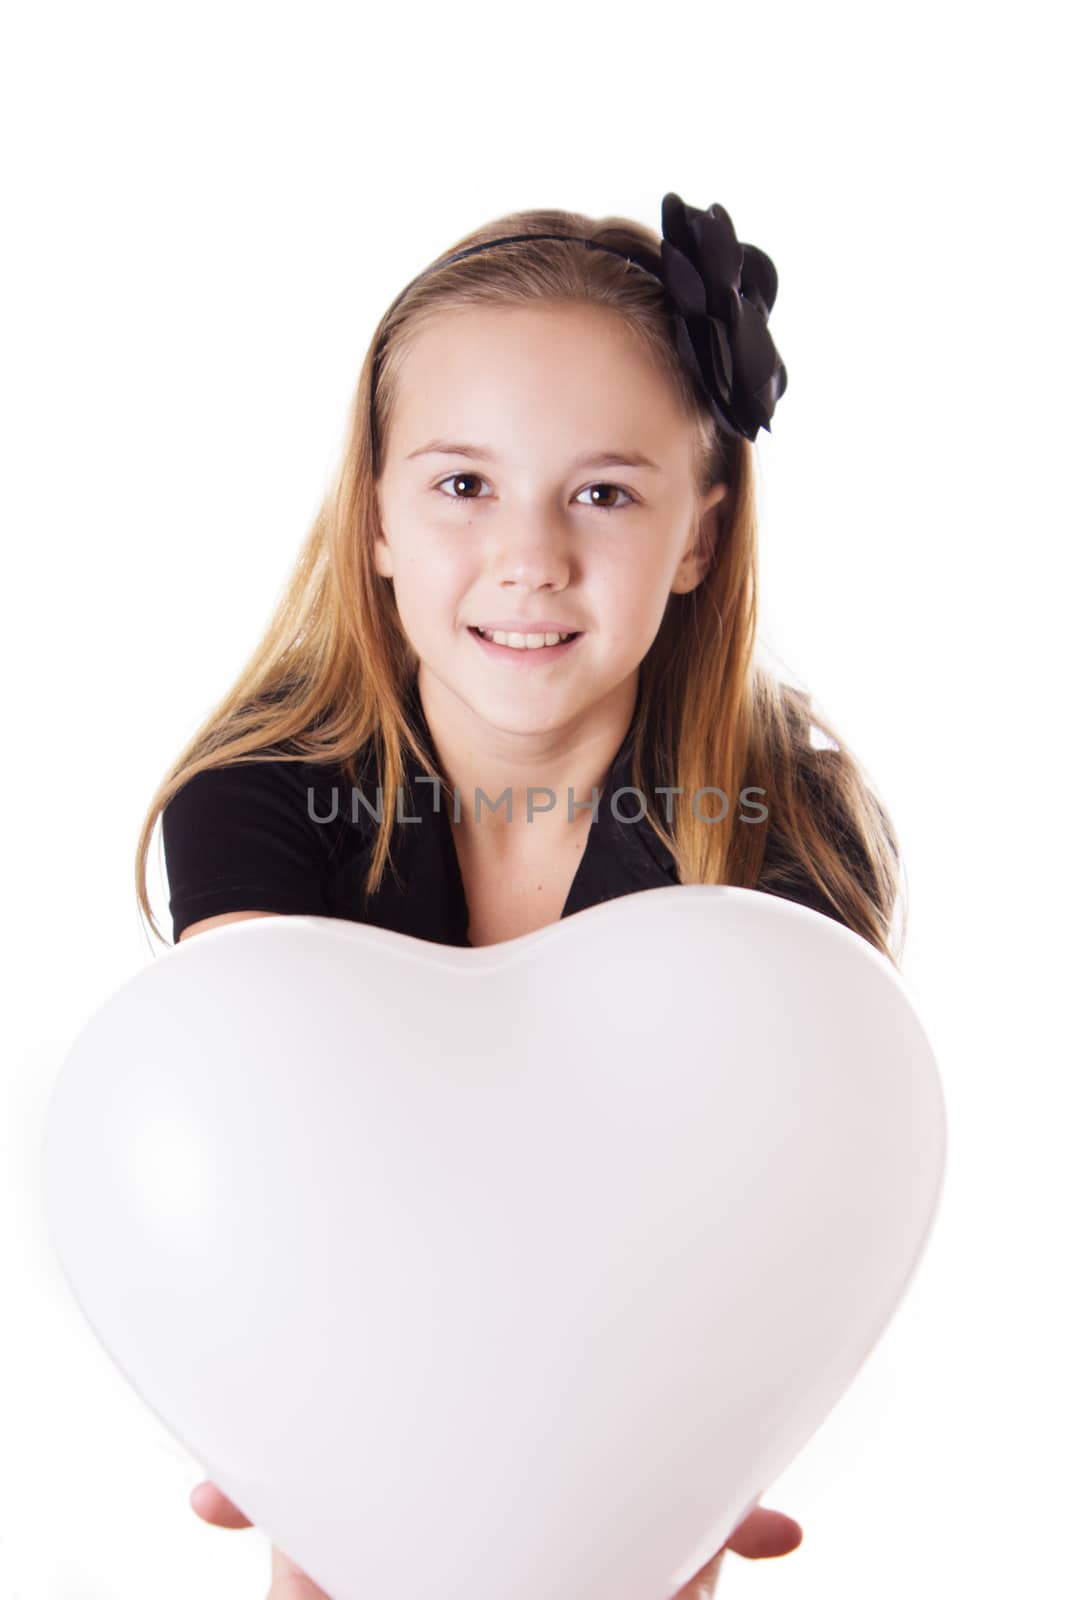 Cute girl holding heart shaped balloon by Angel_a